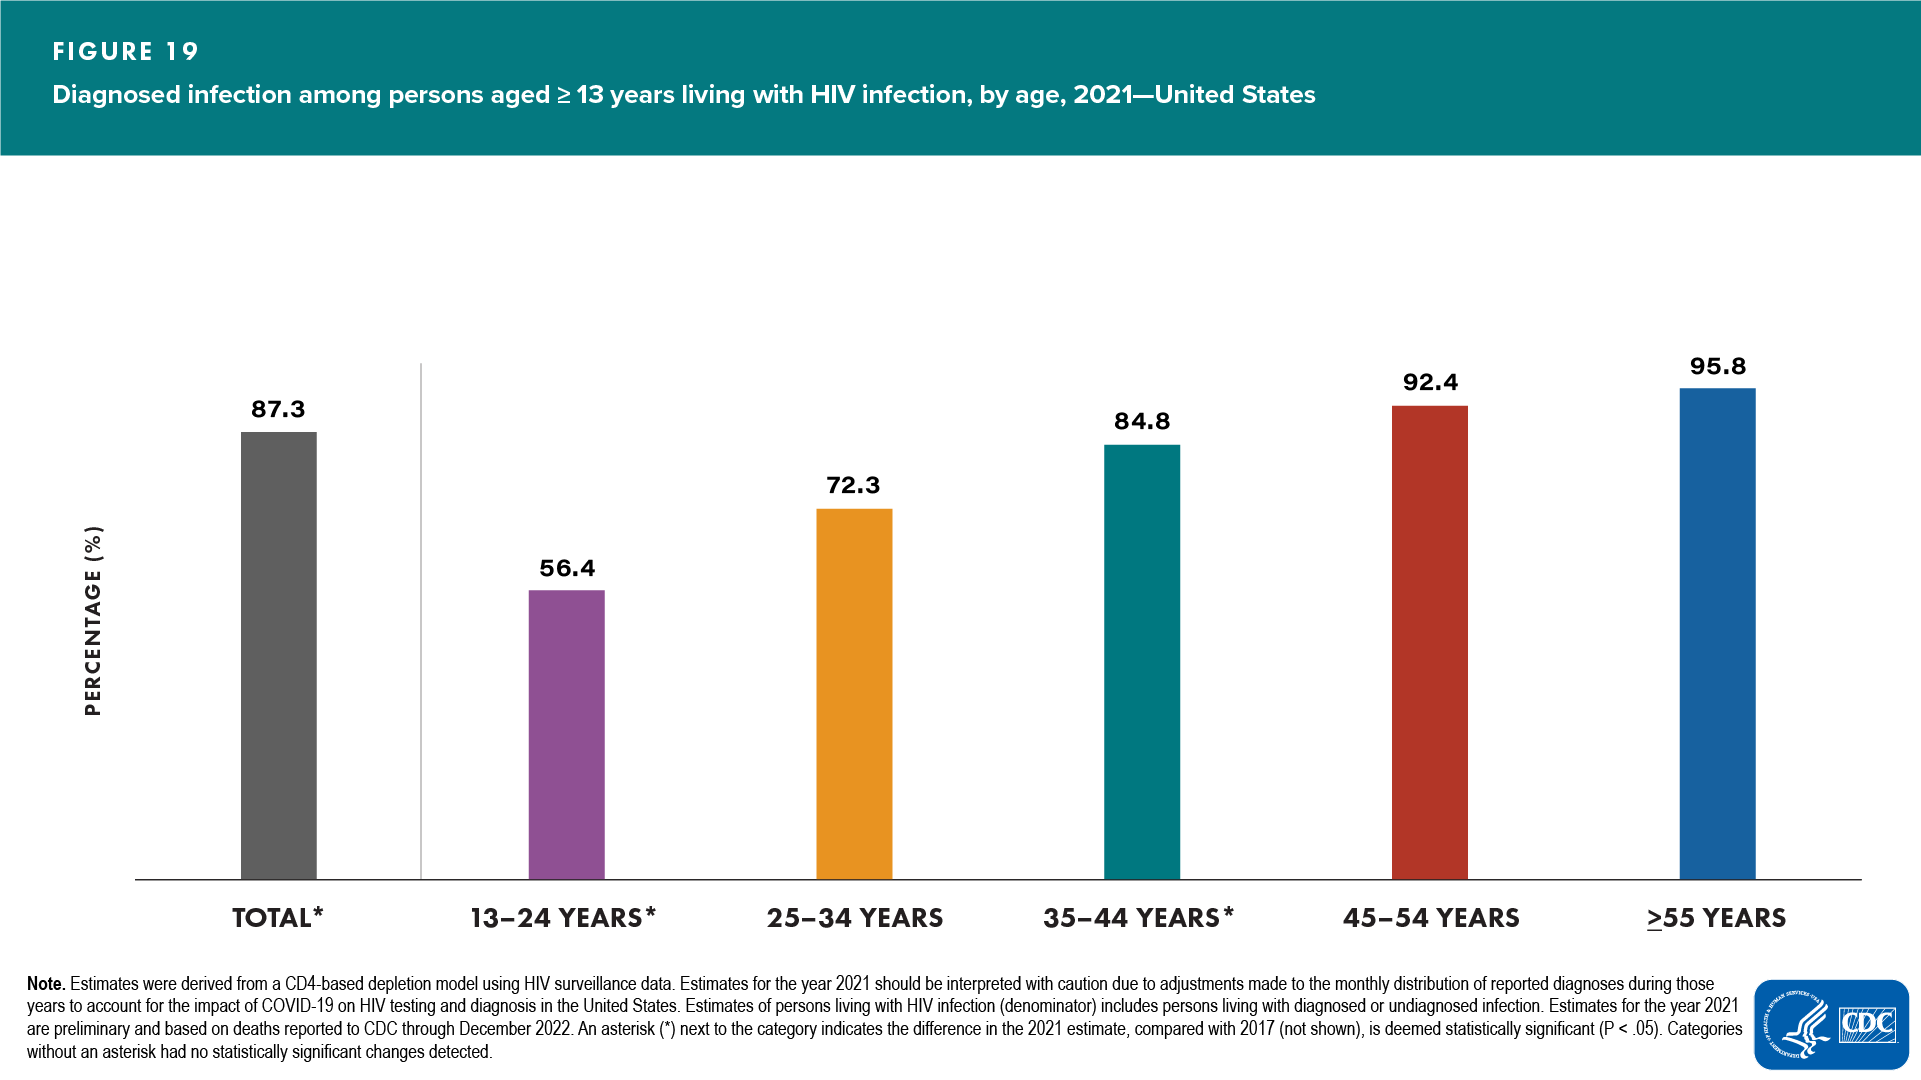 Figure 19. Diagnosed infection among persons aged ≥13 years living with HIV infection, by age, 2021—United States